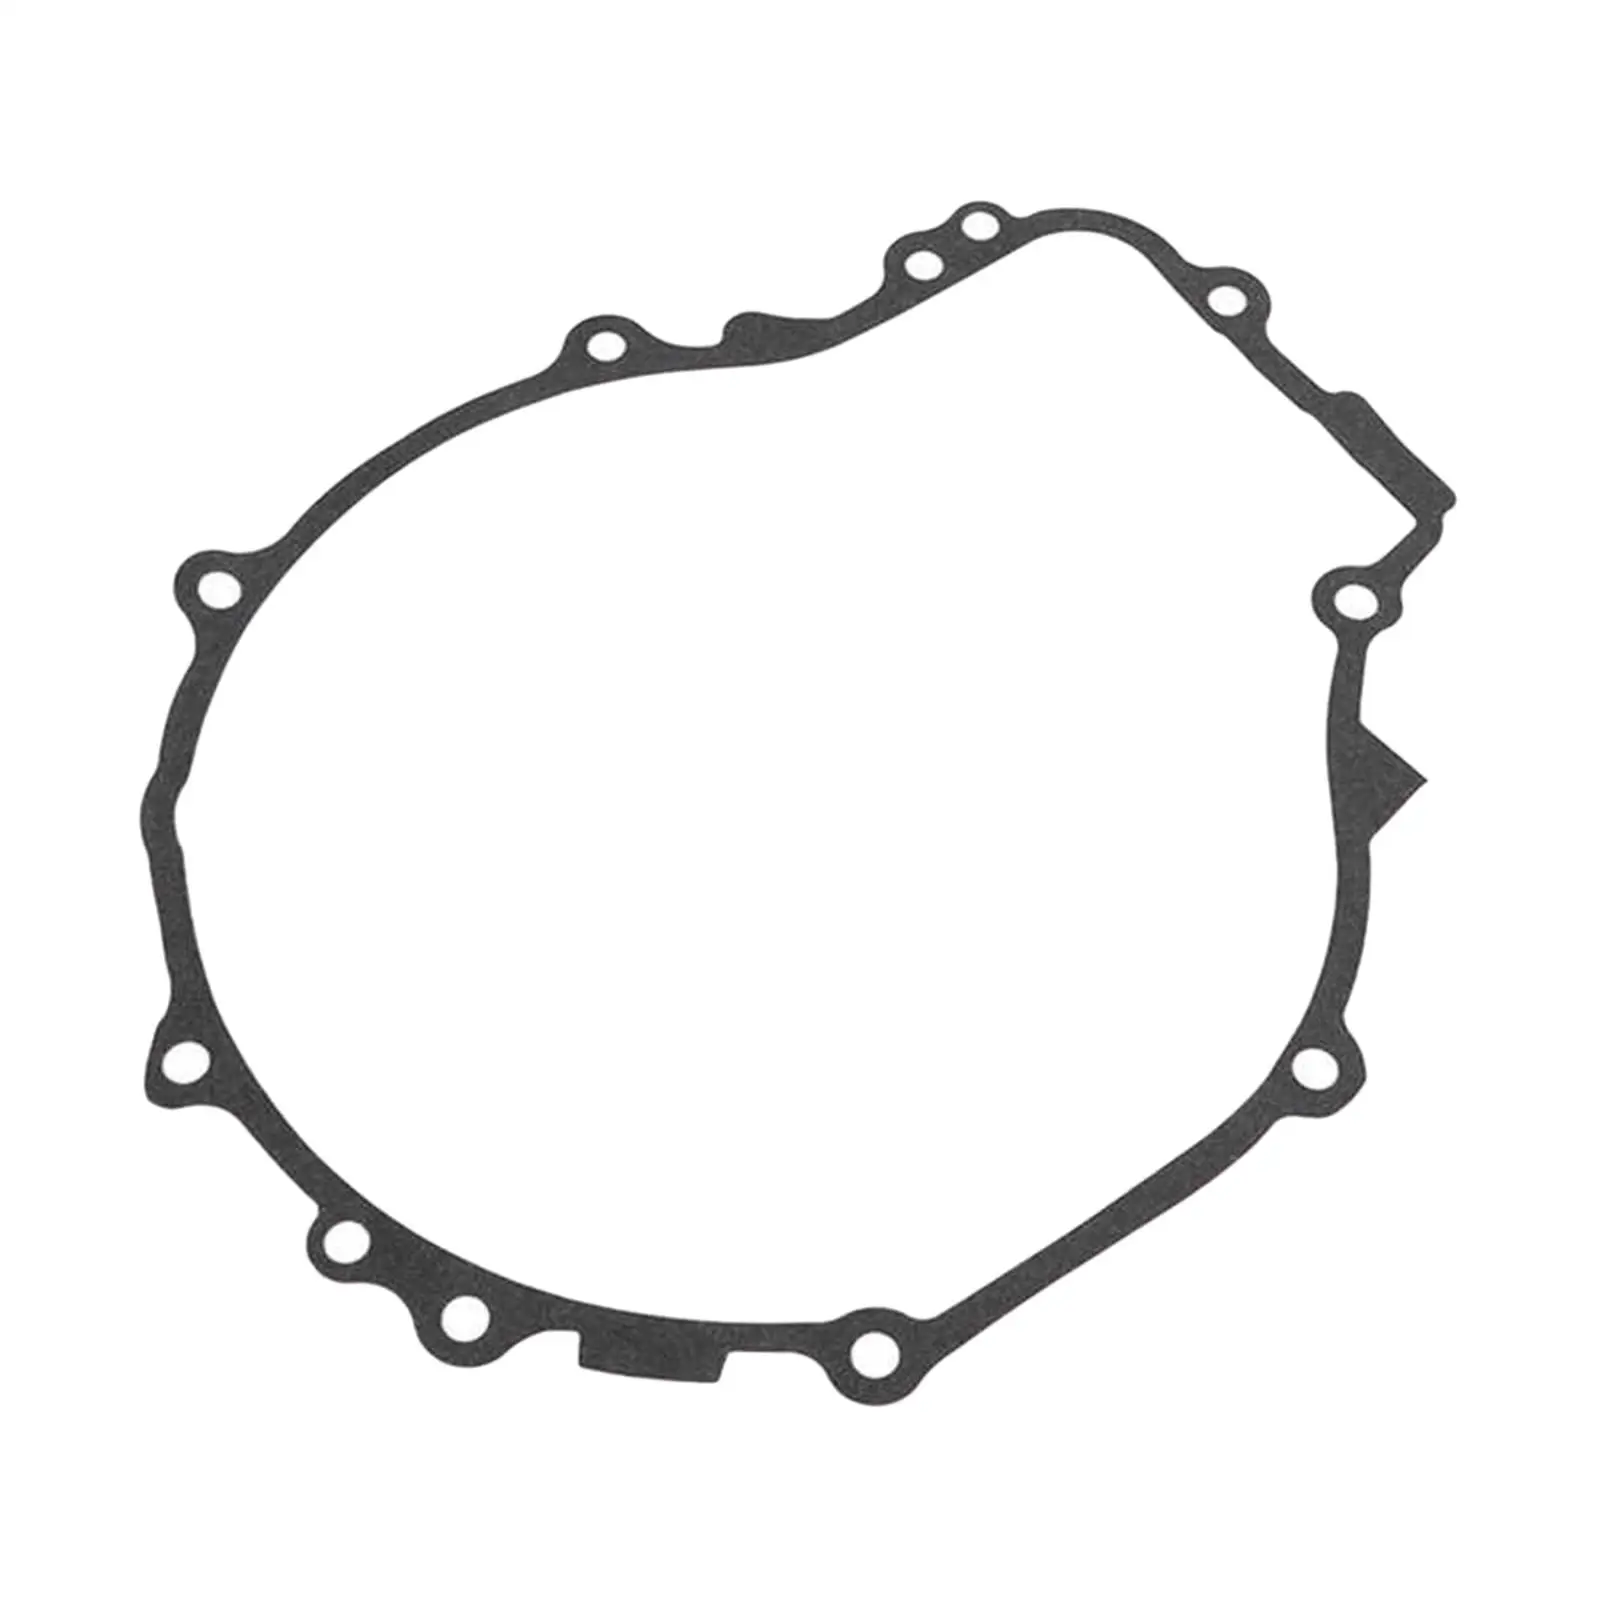 Car Pull Start Gasket 3084933 for Polaris Sportsman 500 1996?2011 Replace High Quality